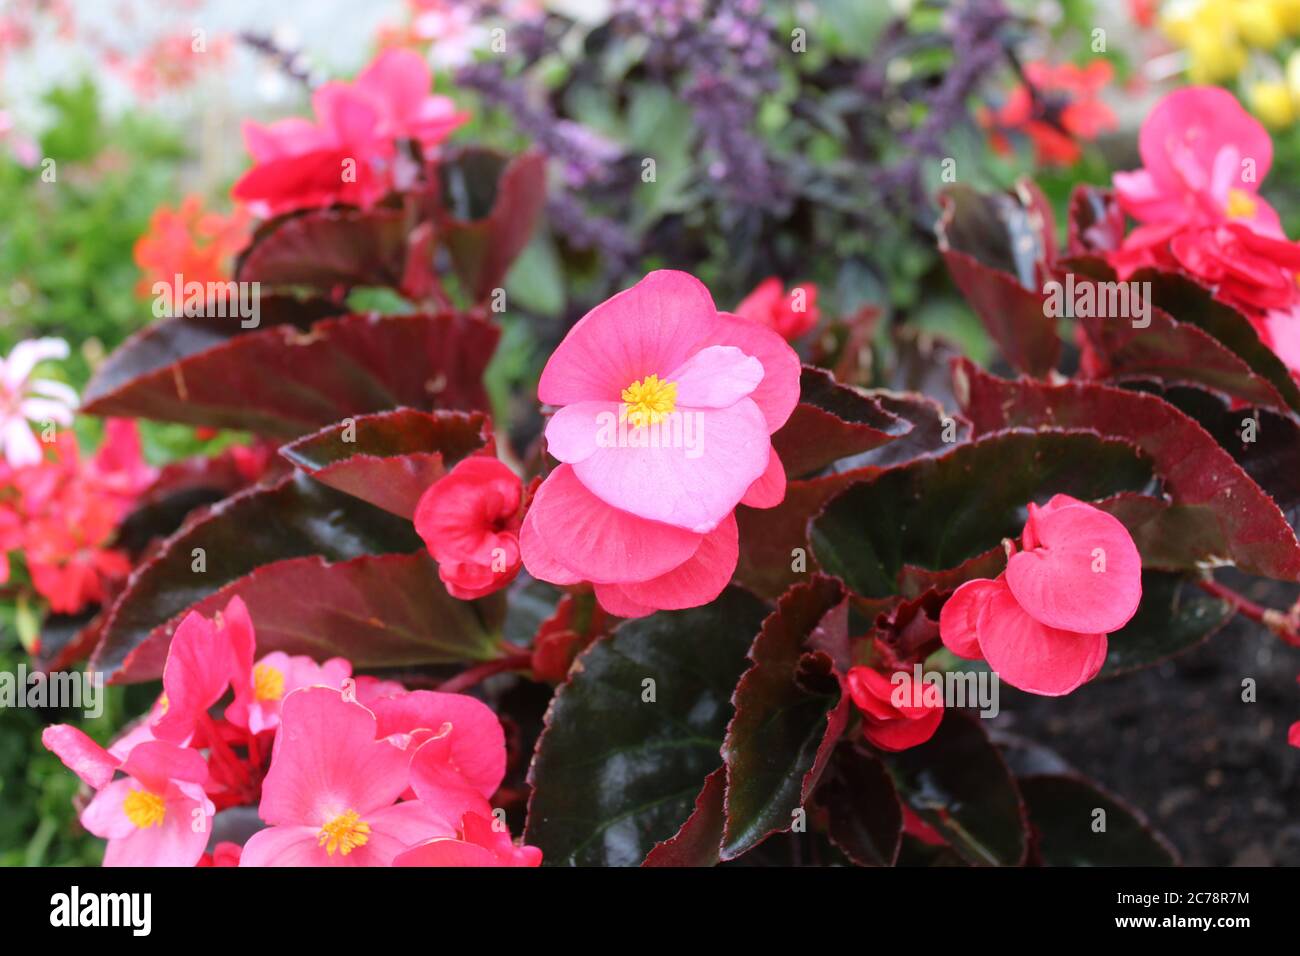 The picture shows a wax begonia in the garden Stock Photo